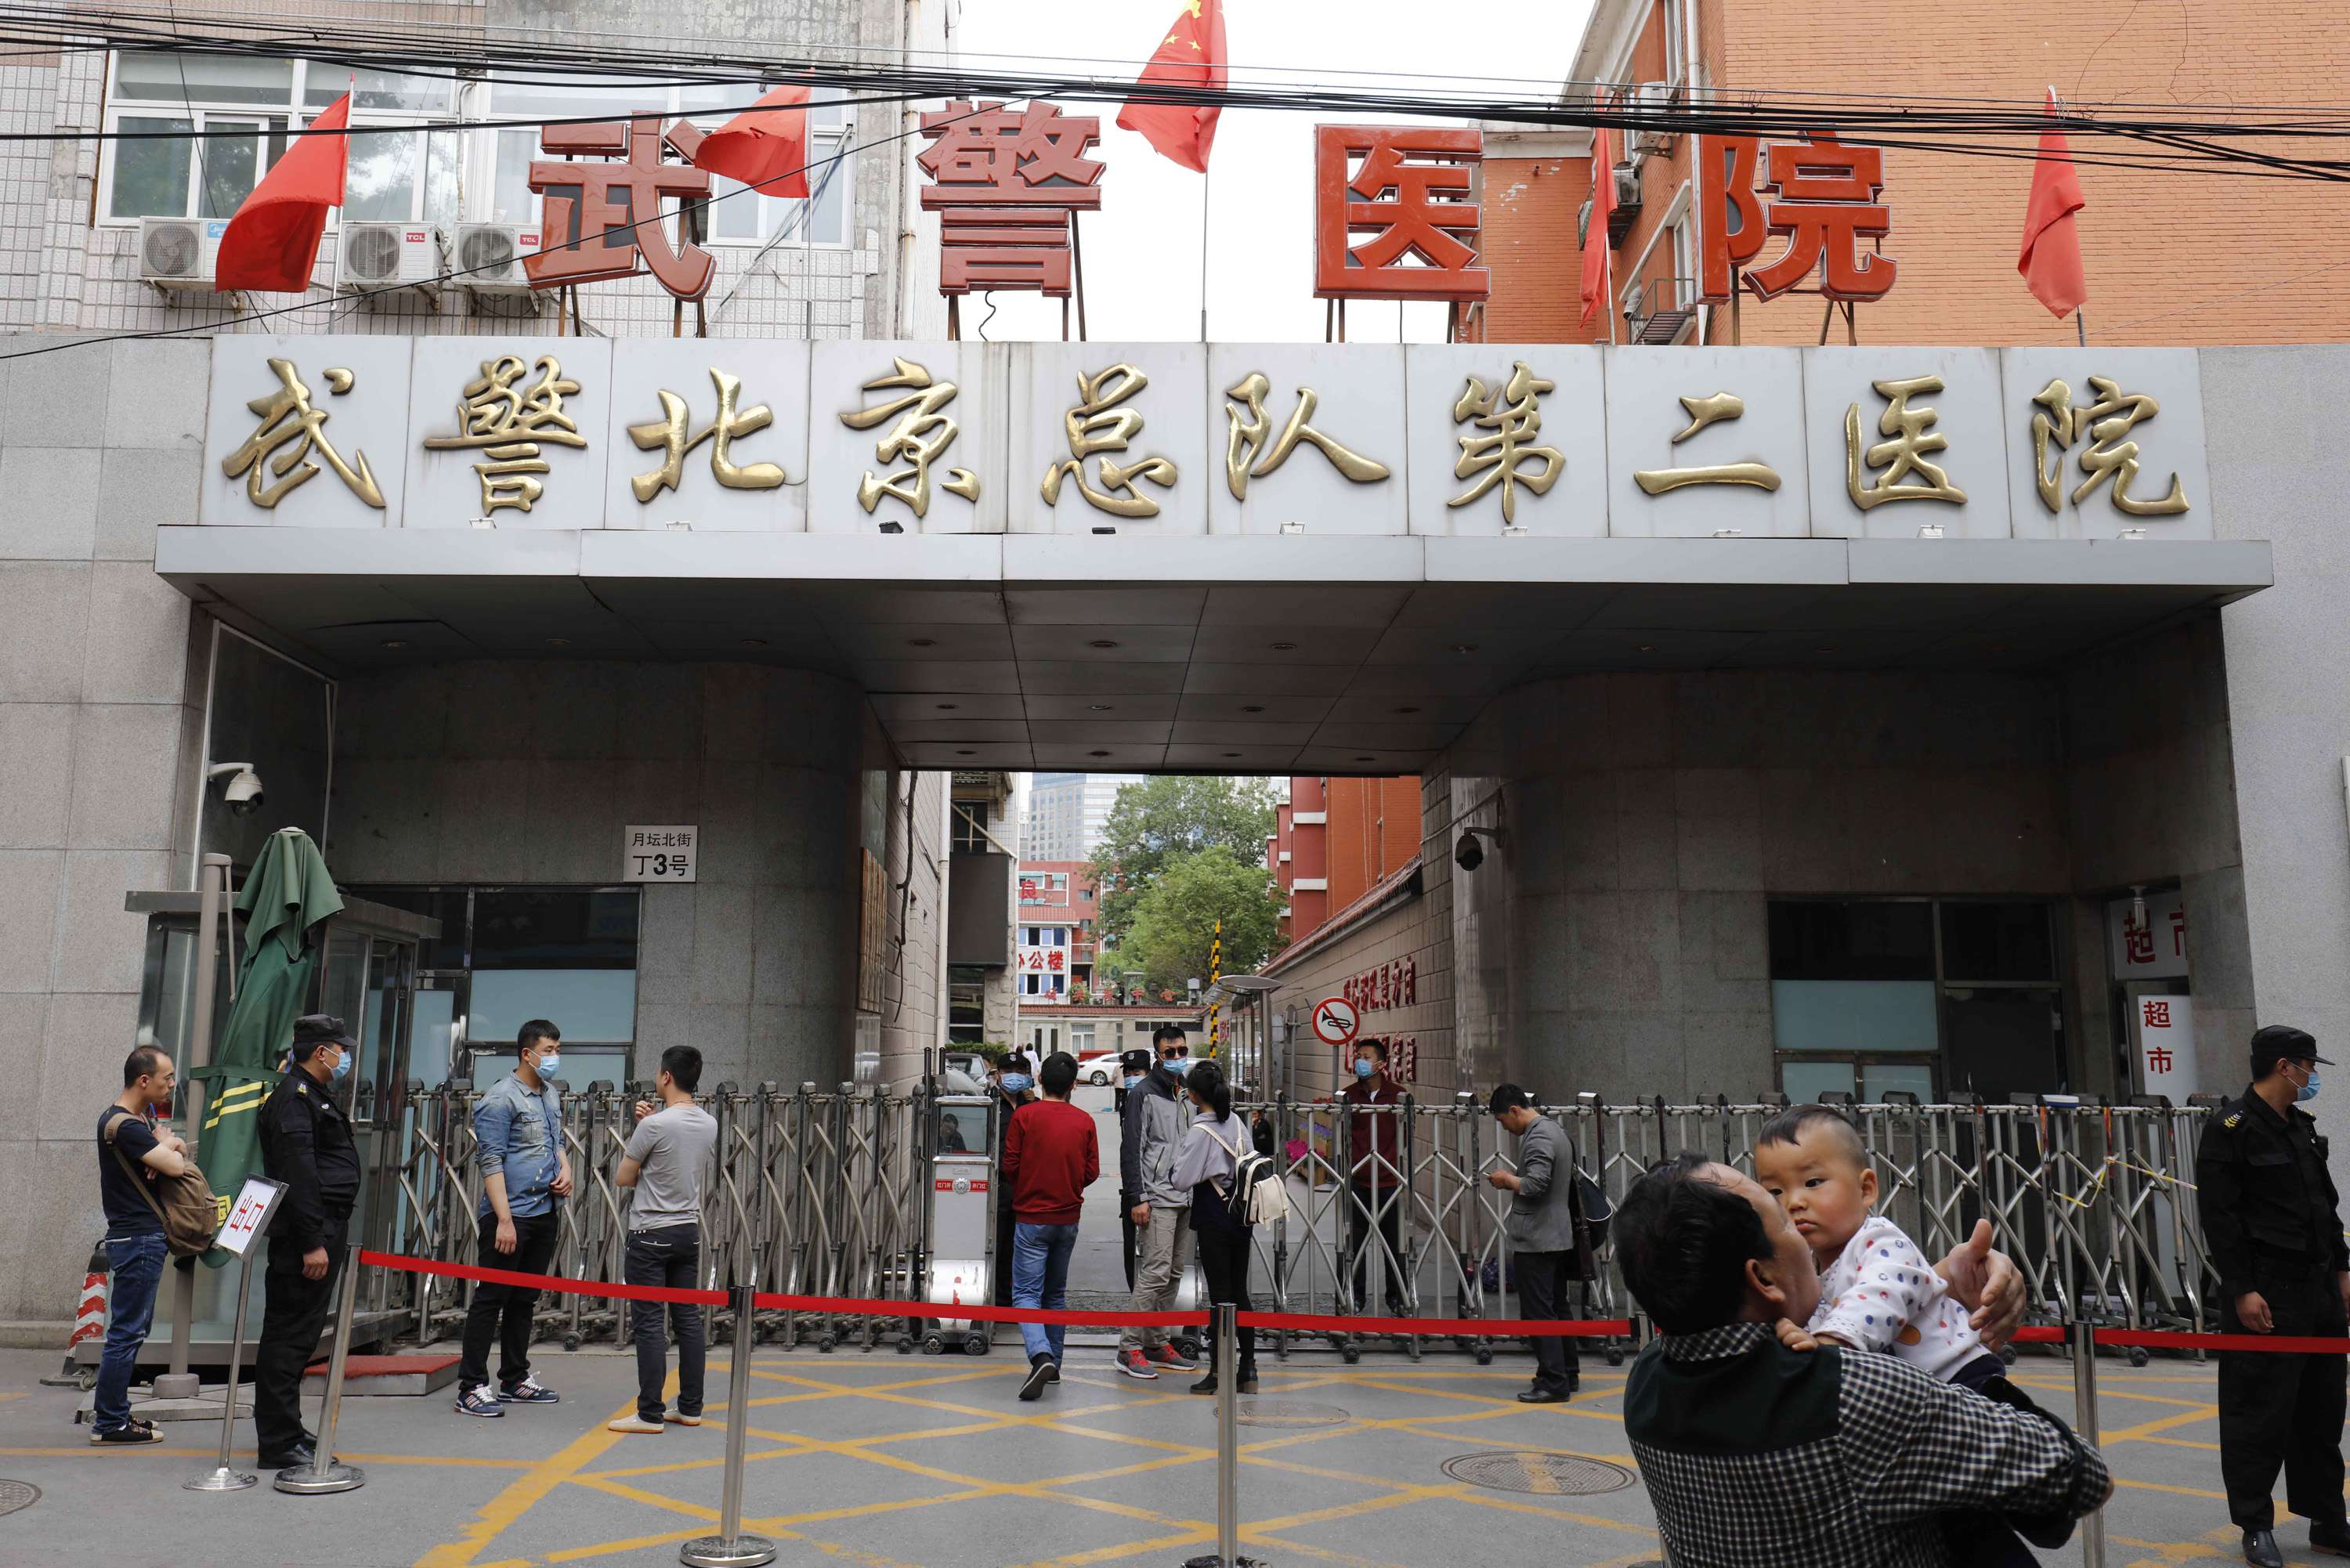 The authorities are investigating claims the No 2 Hospital of the Beijing Armed Police Corps outsourced services to company in the Putian network. Photo: AP